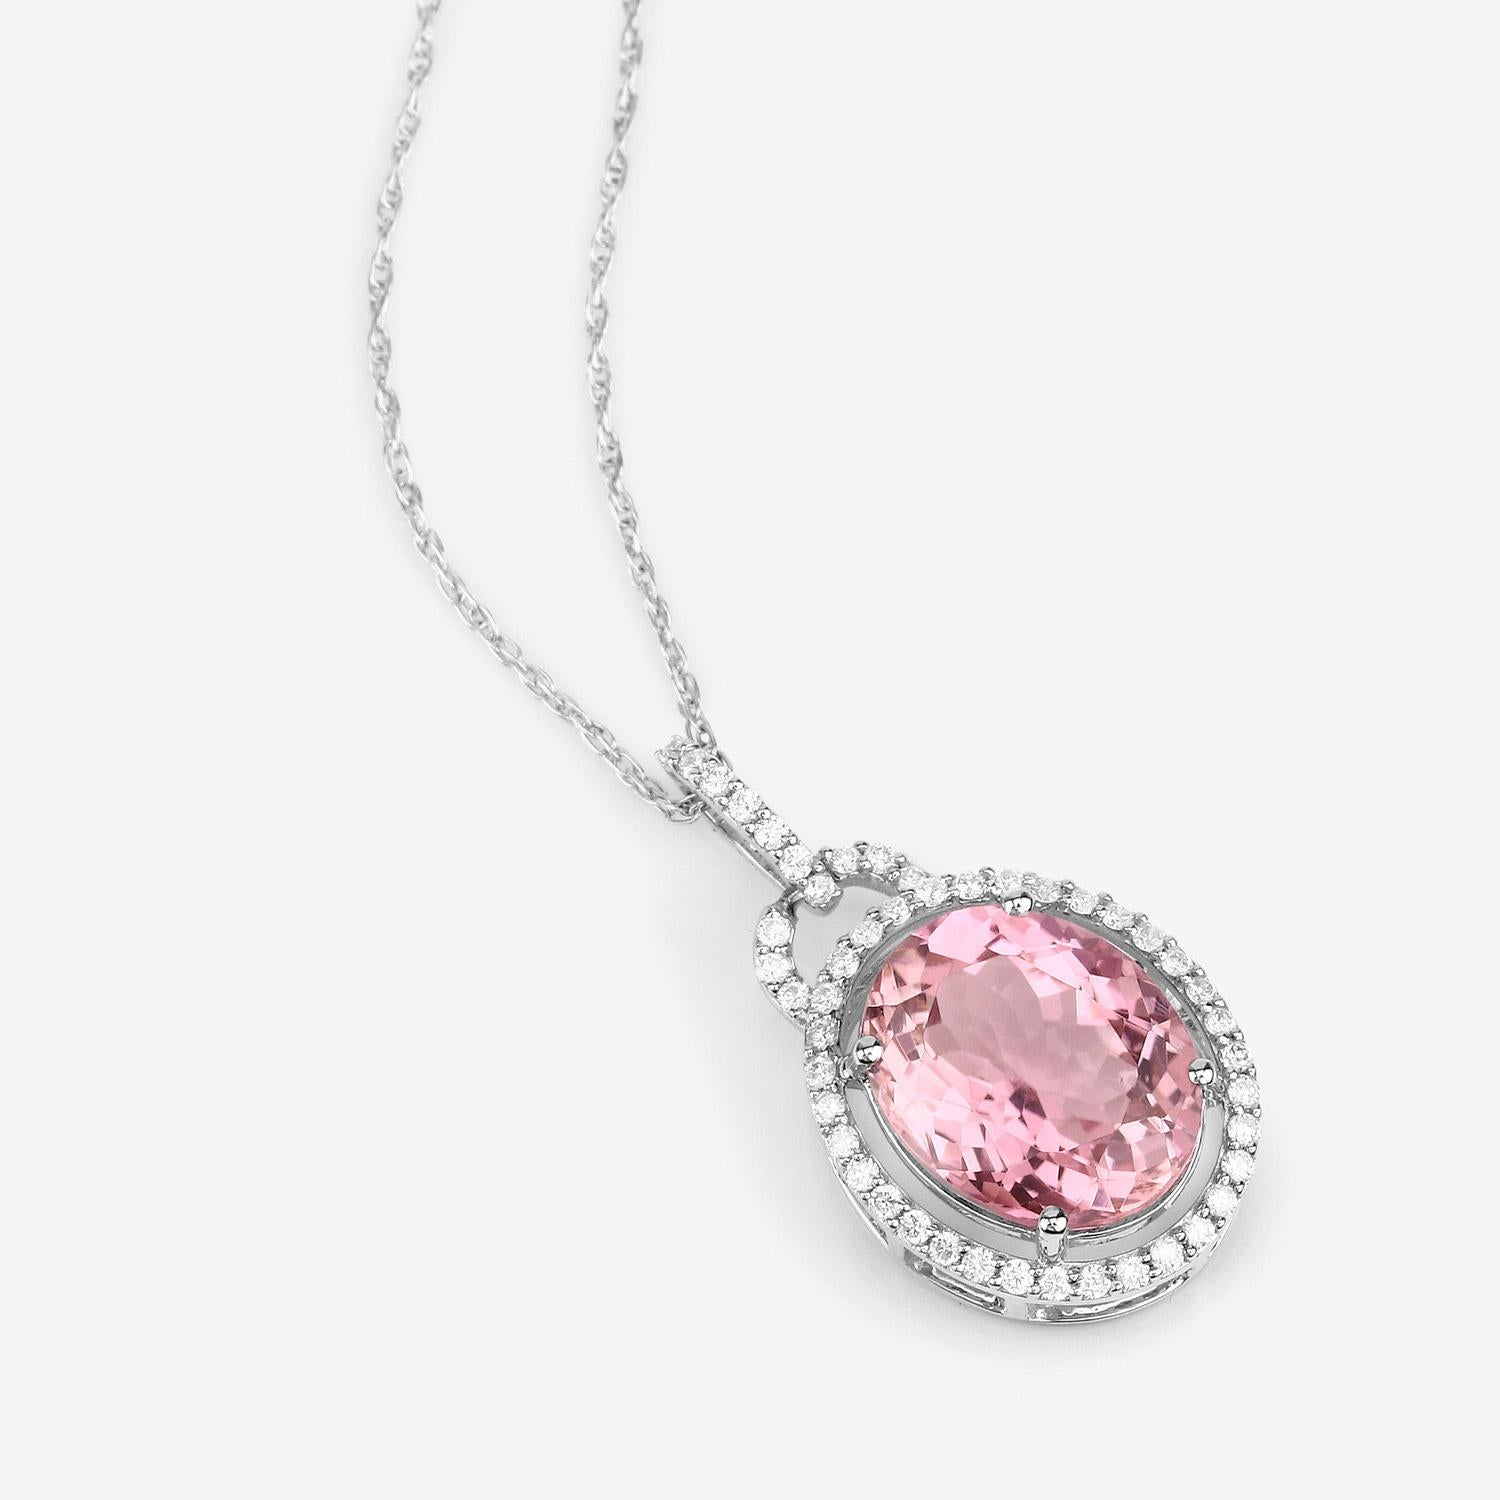 It comes with the Gemological Appraisal by GIA GG/AJP
All Gemstones are Natural
Pink Tourmaline = 3.69  Carat
47 Diamonds = 0.21 Carats
Metal: 14K White Gold
Dimensions: 23 x 13 mm
